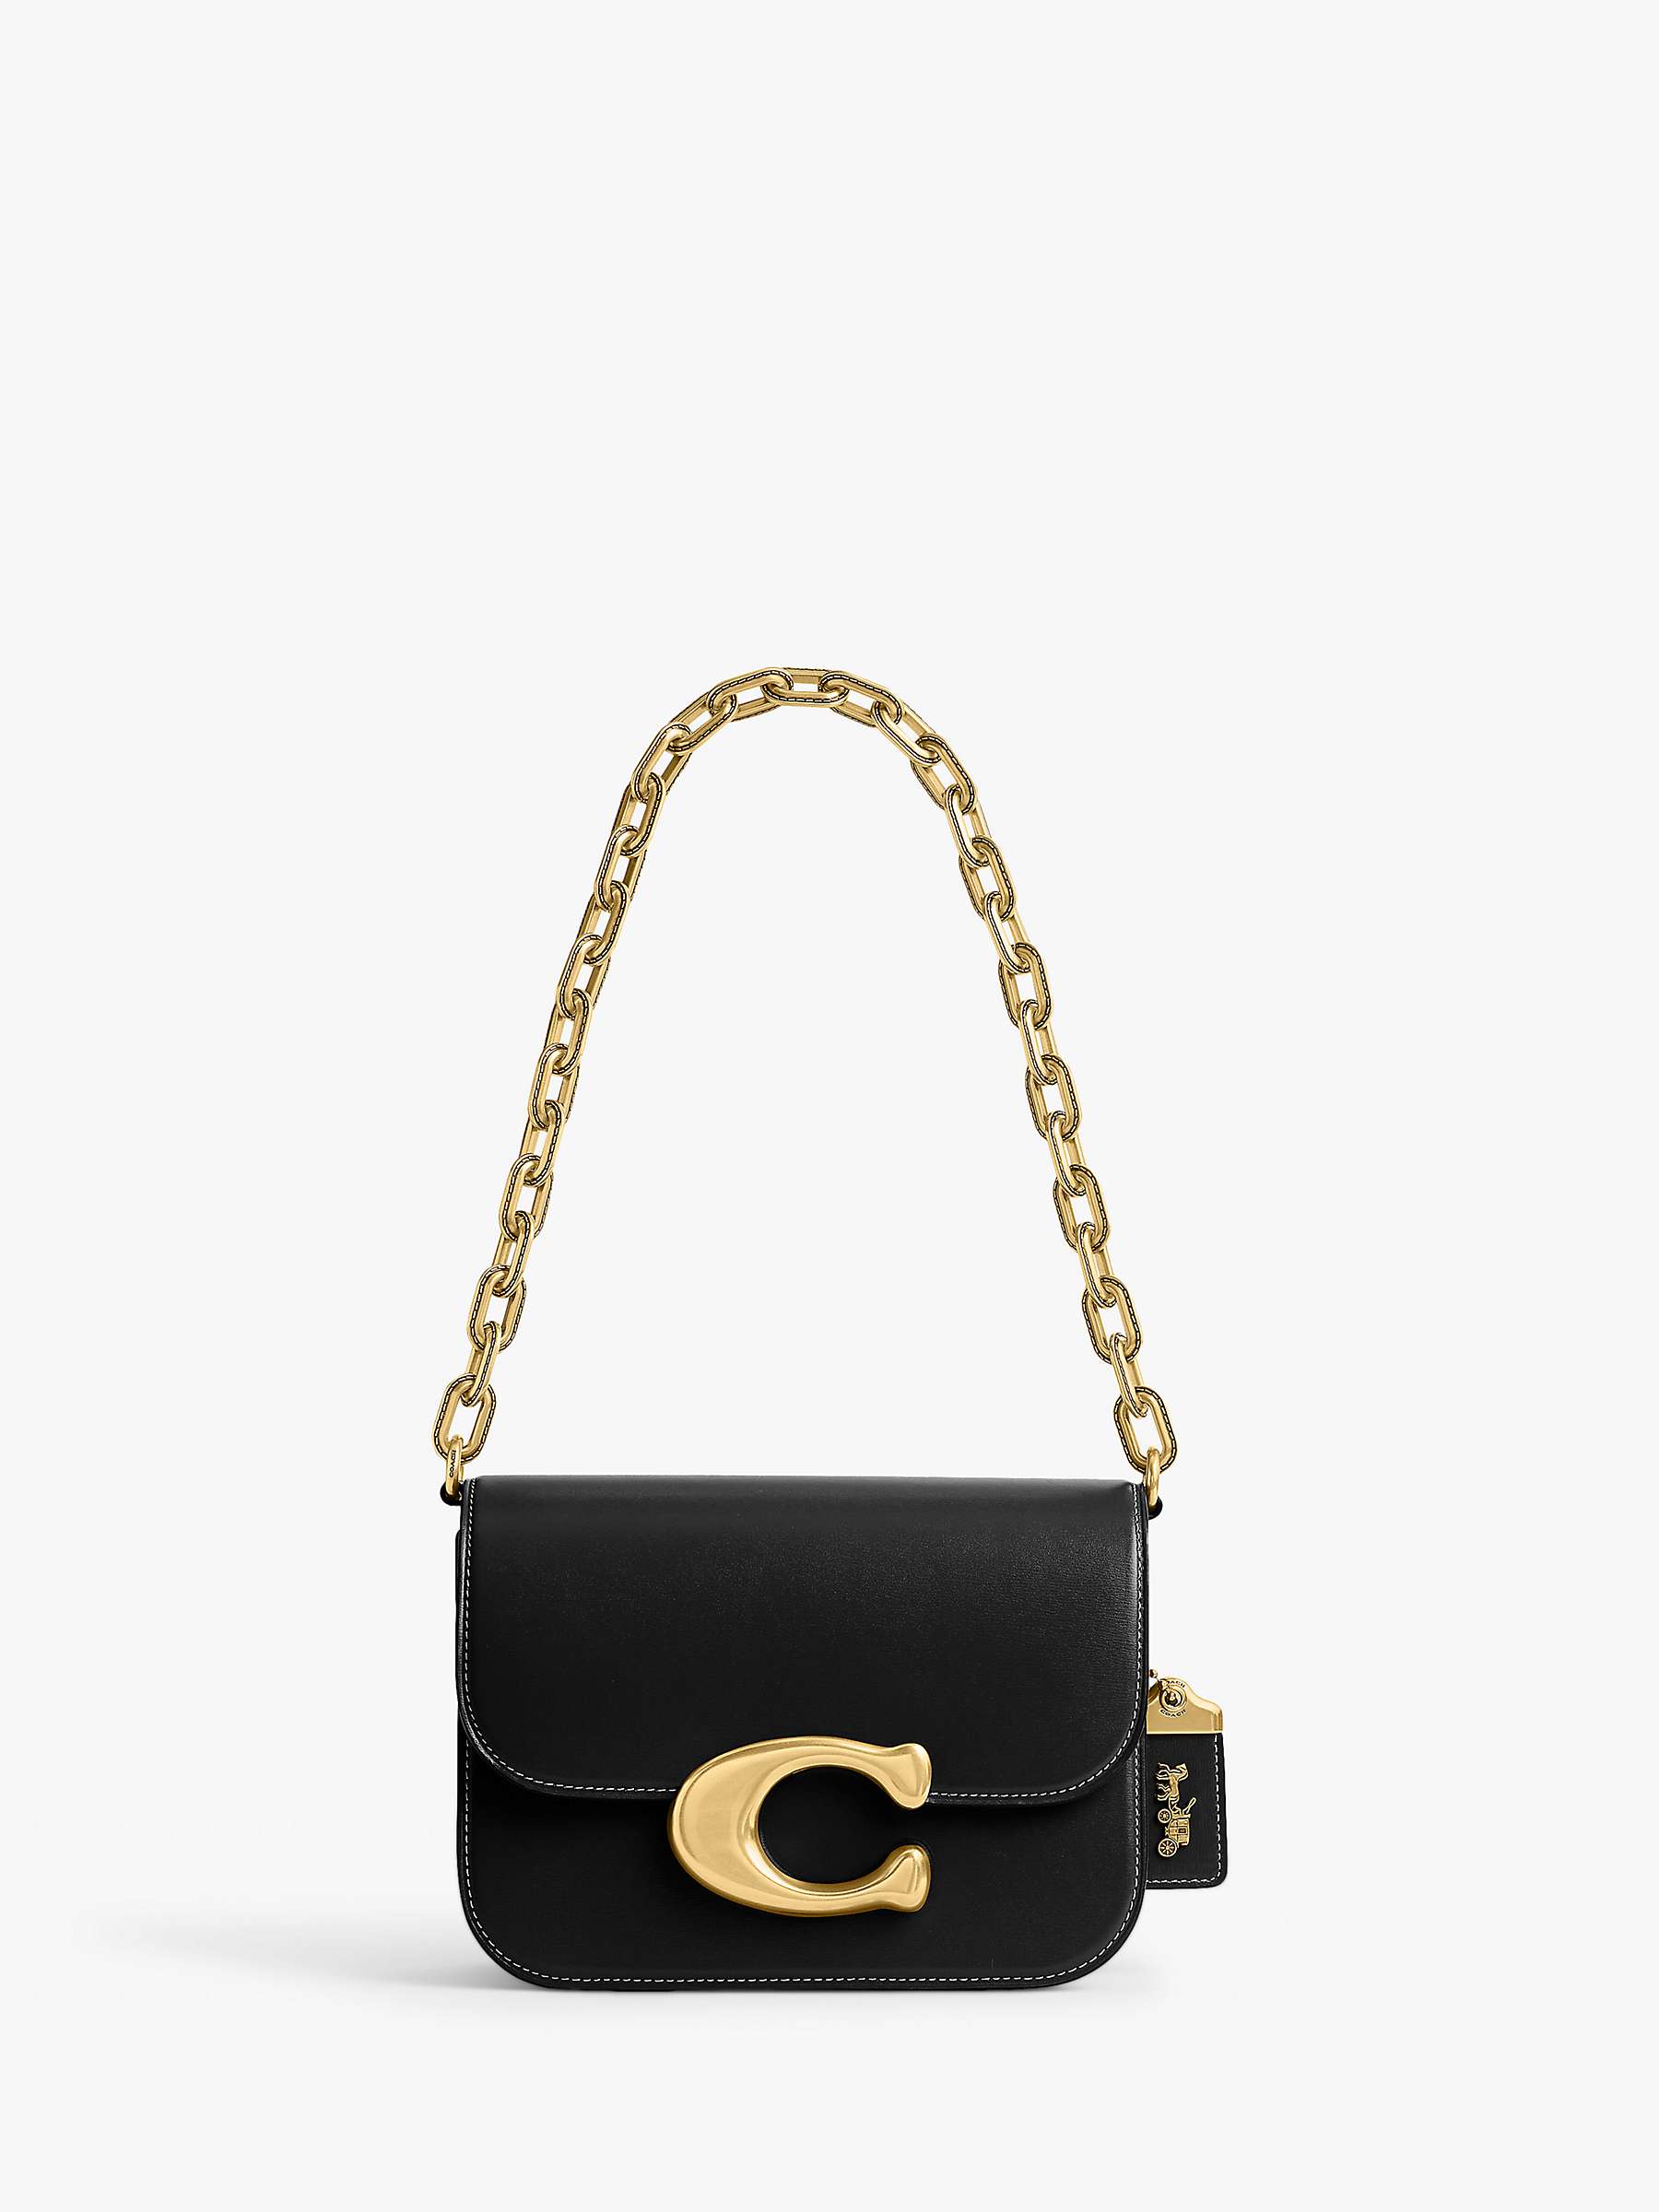 Buy Coach Idol Leather Flapover Chain Strap Shoulder Bag Online at johnlewis.com